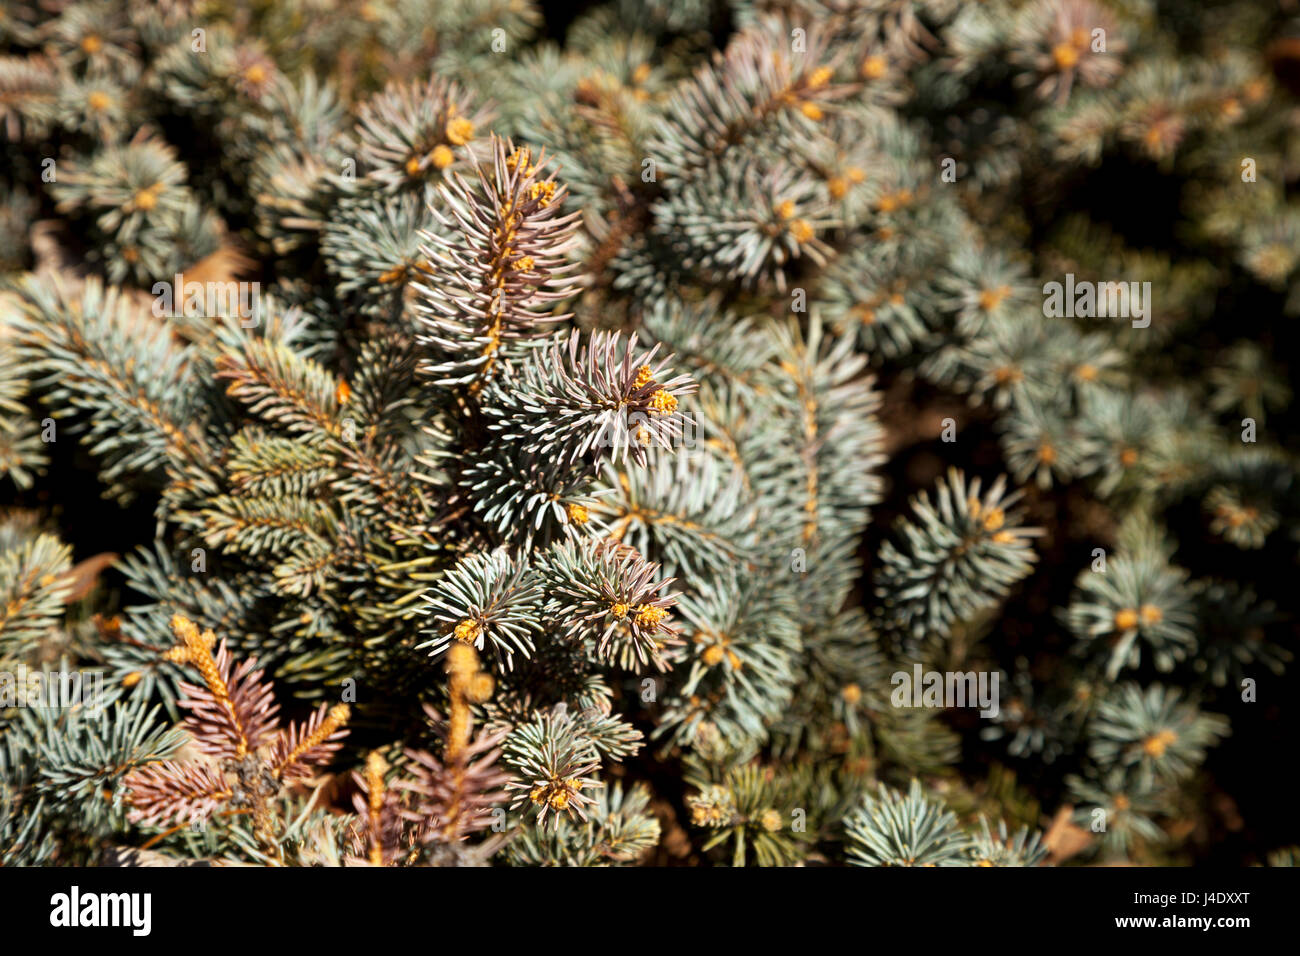 Fir tree branches in the daylight blurry background. Conifer tree needles in the forest close-up. Blue spruce texture  in shallow focus backdrop Stock Photo